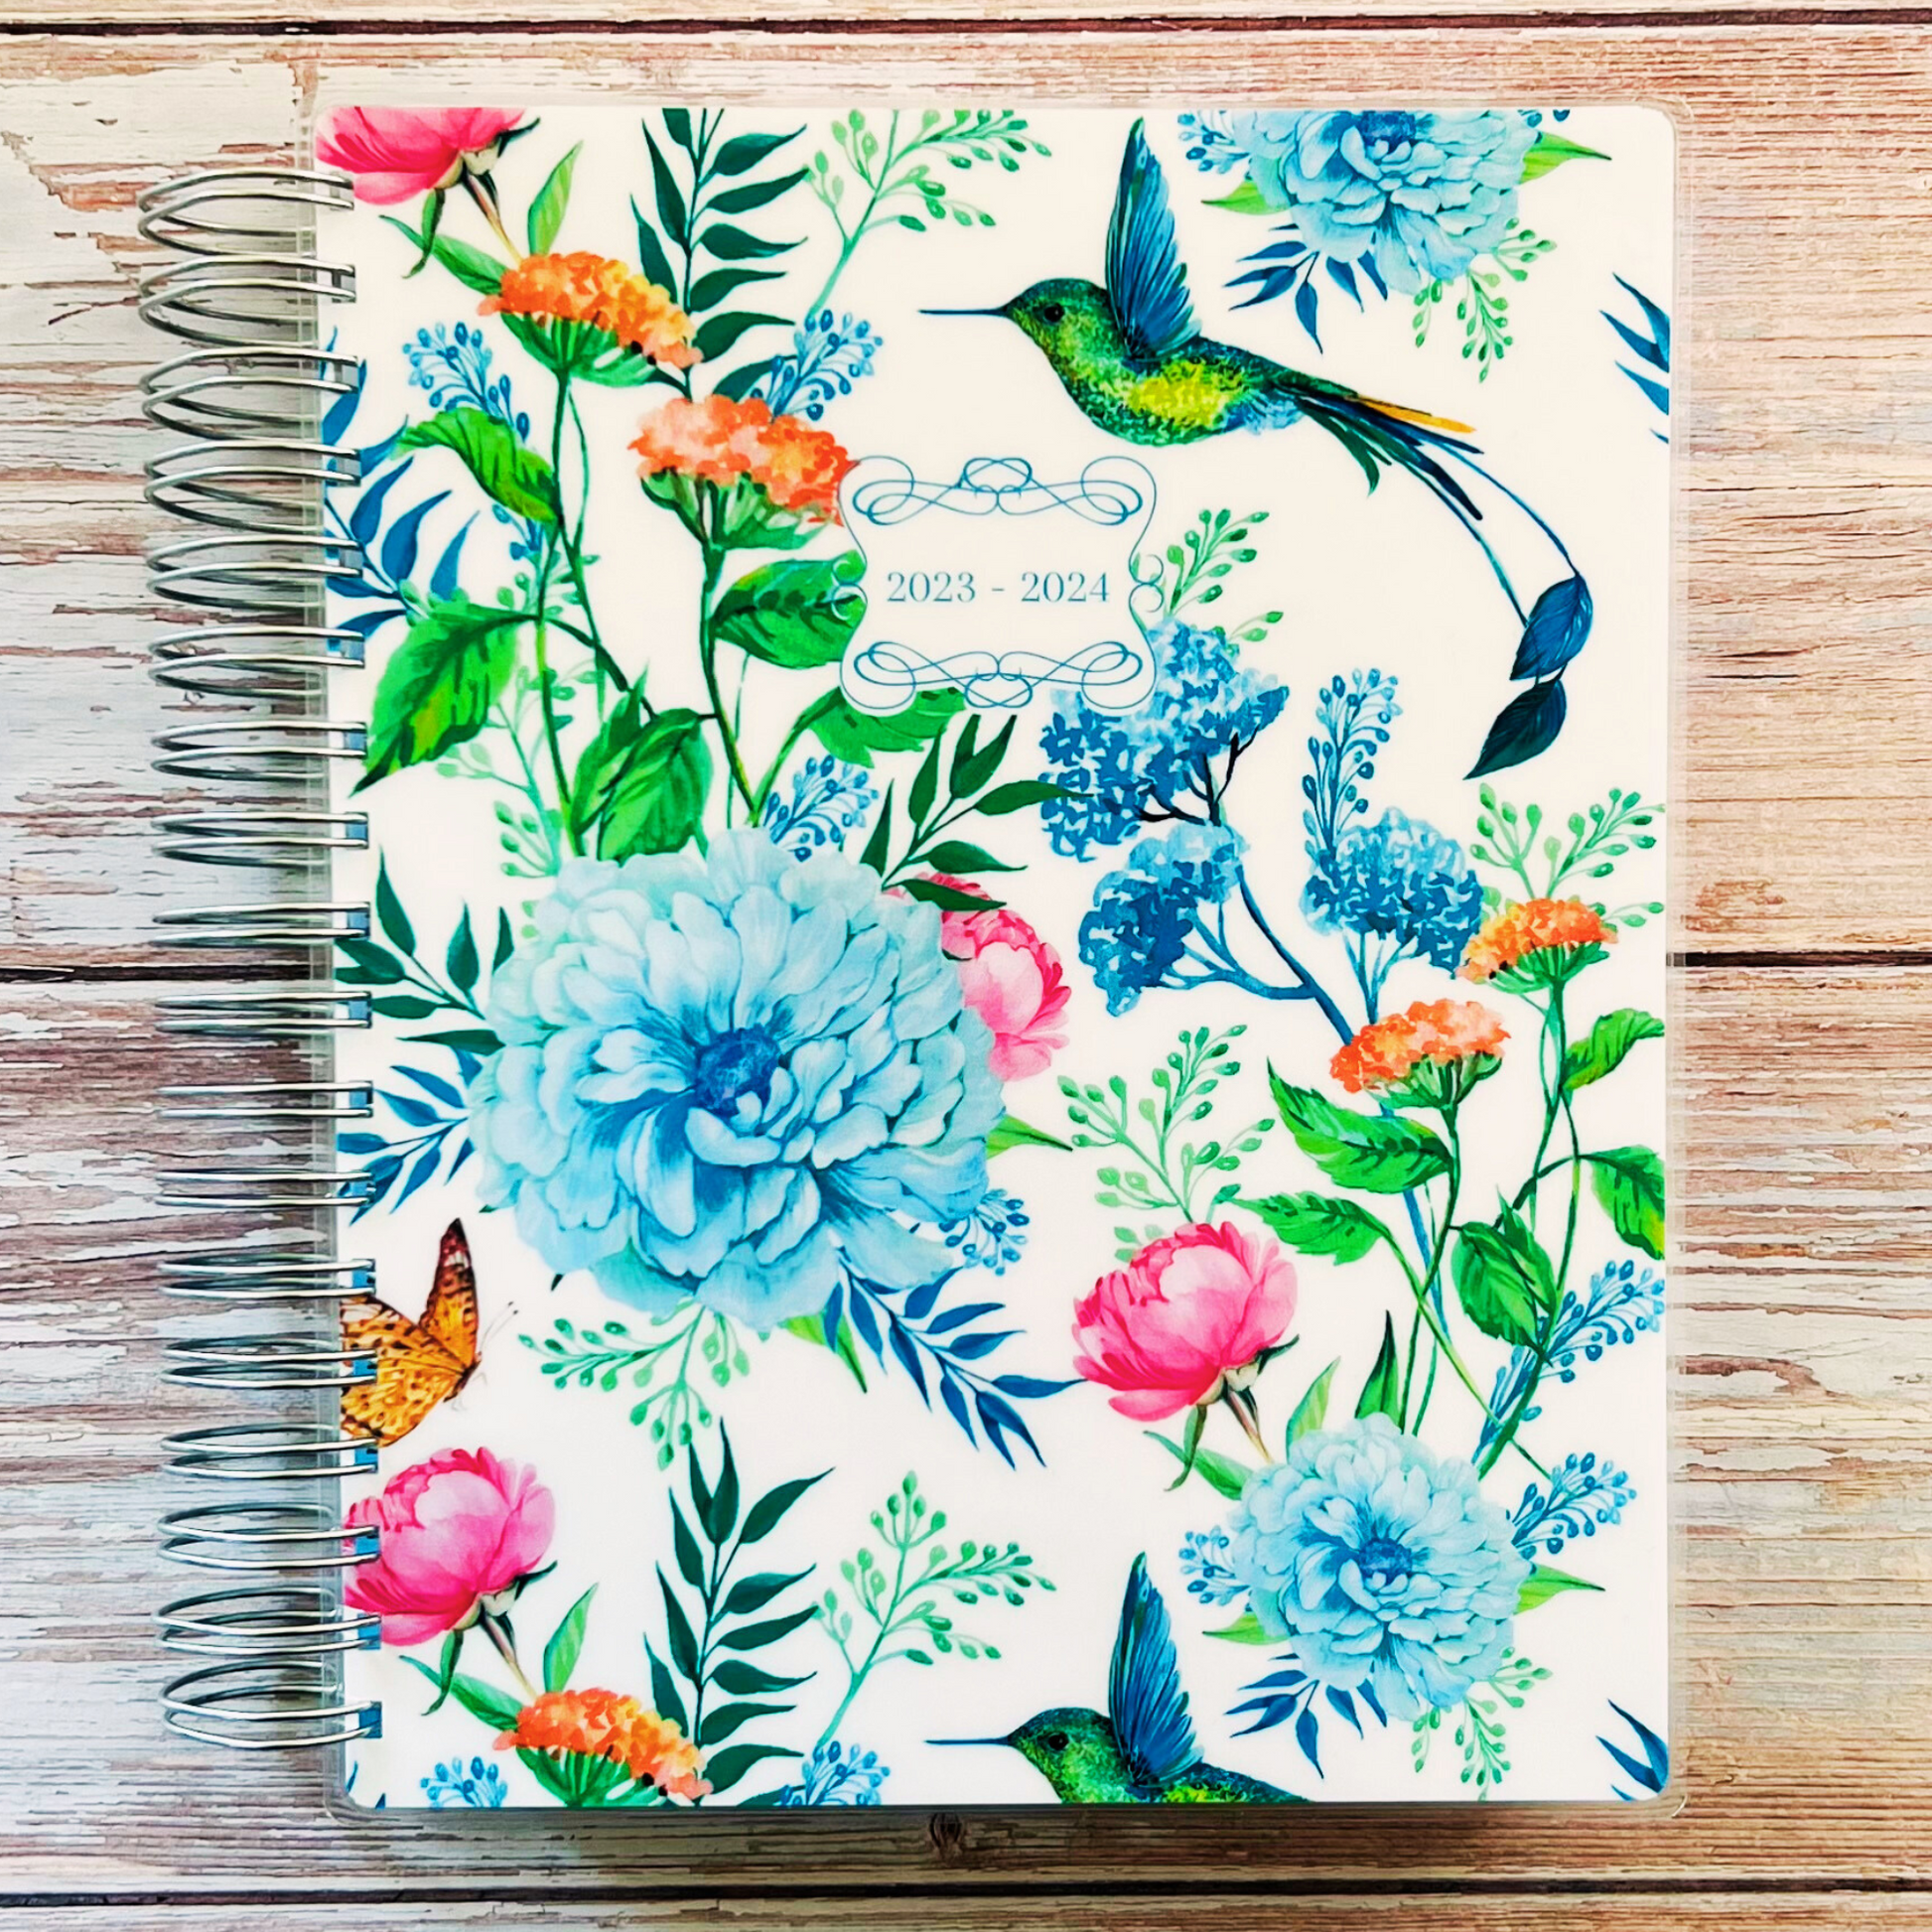 Personalized 6 Month Daily Planner 2023-2024 | Blue Hummingbird Garden Daily Planners Artful Planner Co. June-2023 20 Meal Planners +$3.00 (added to back) 